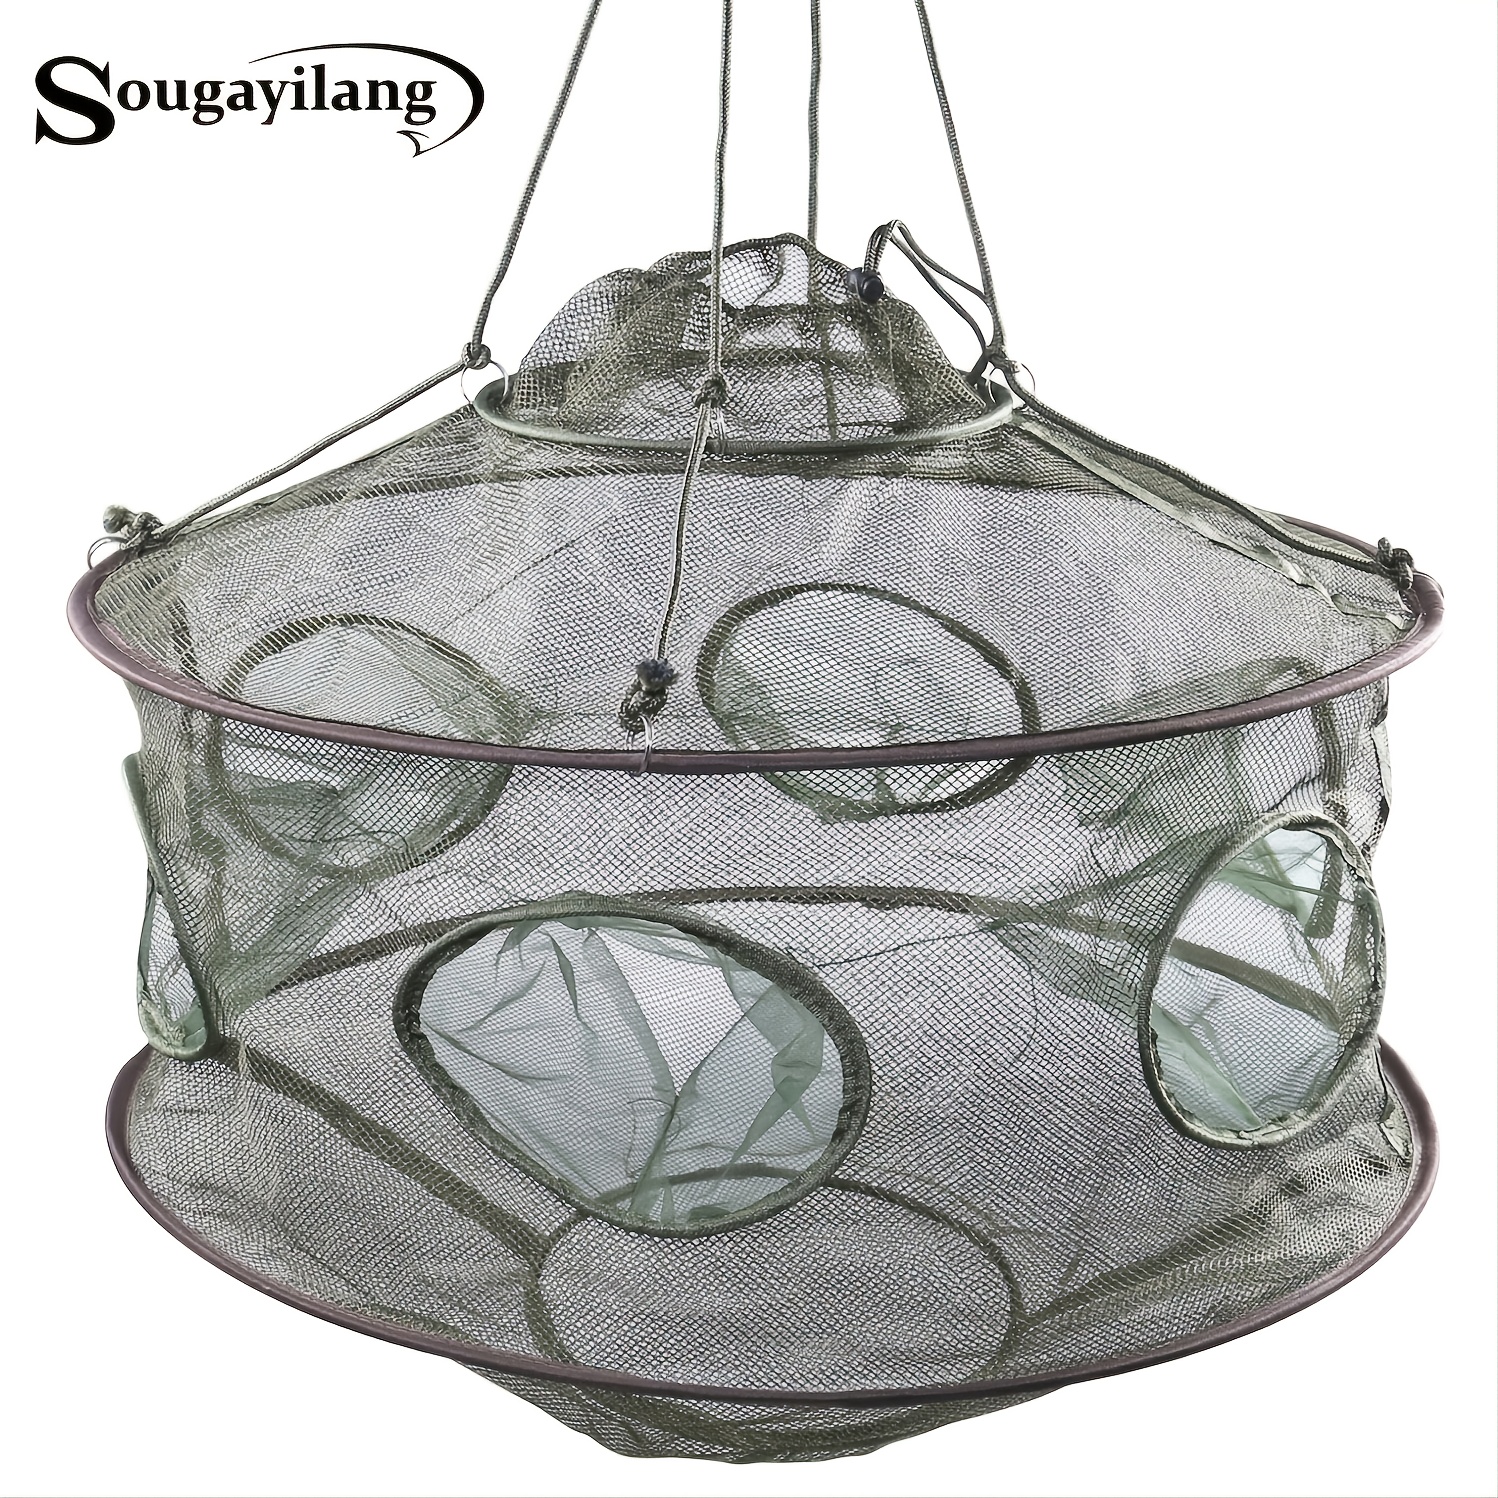 Sougayilang Foldable Automatic Fishing Net with 6 Holes - Portable Nylon  Shrimp Cage and Crayfish Trap for Easy Cast Nets